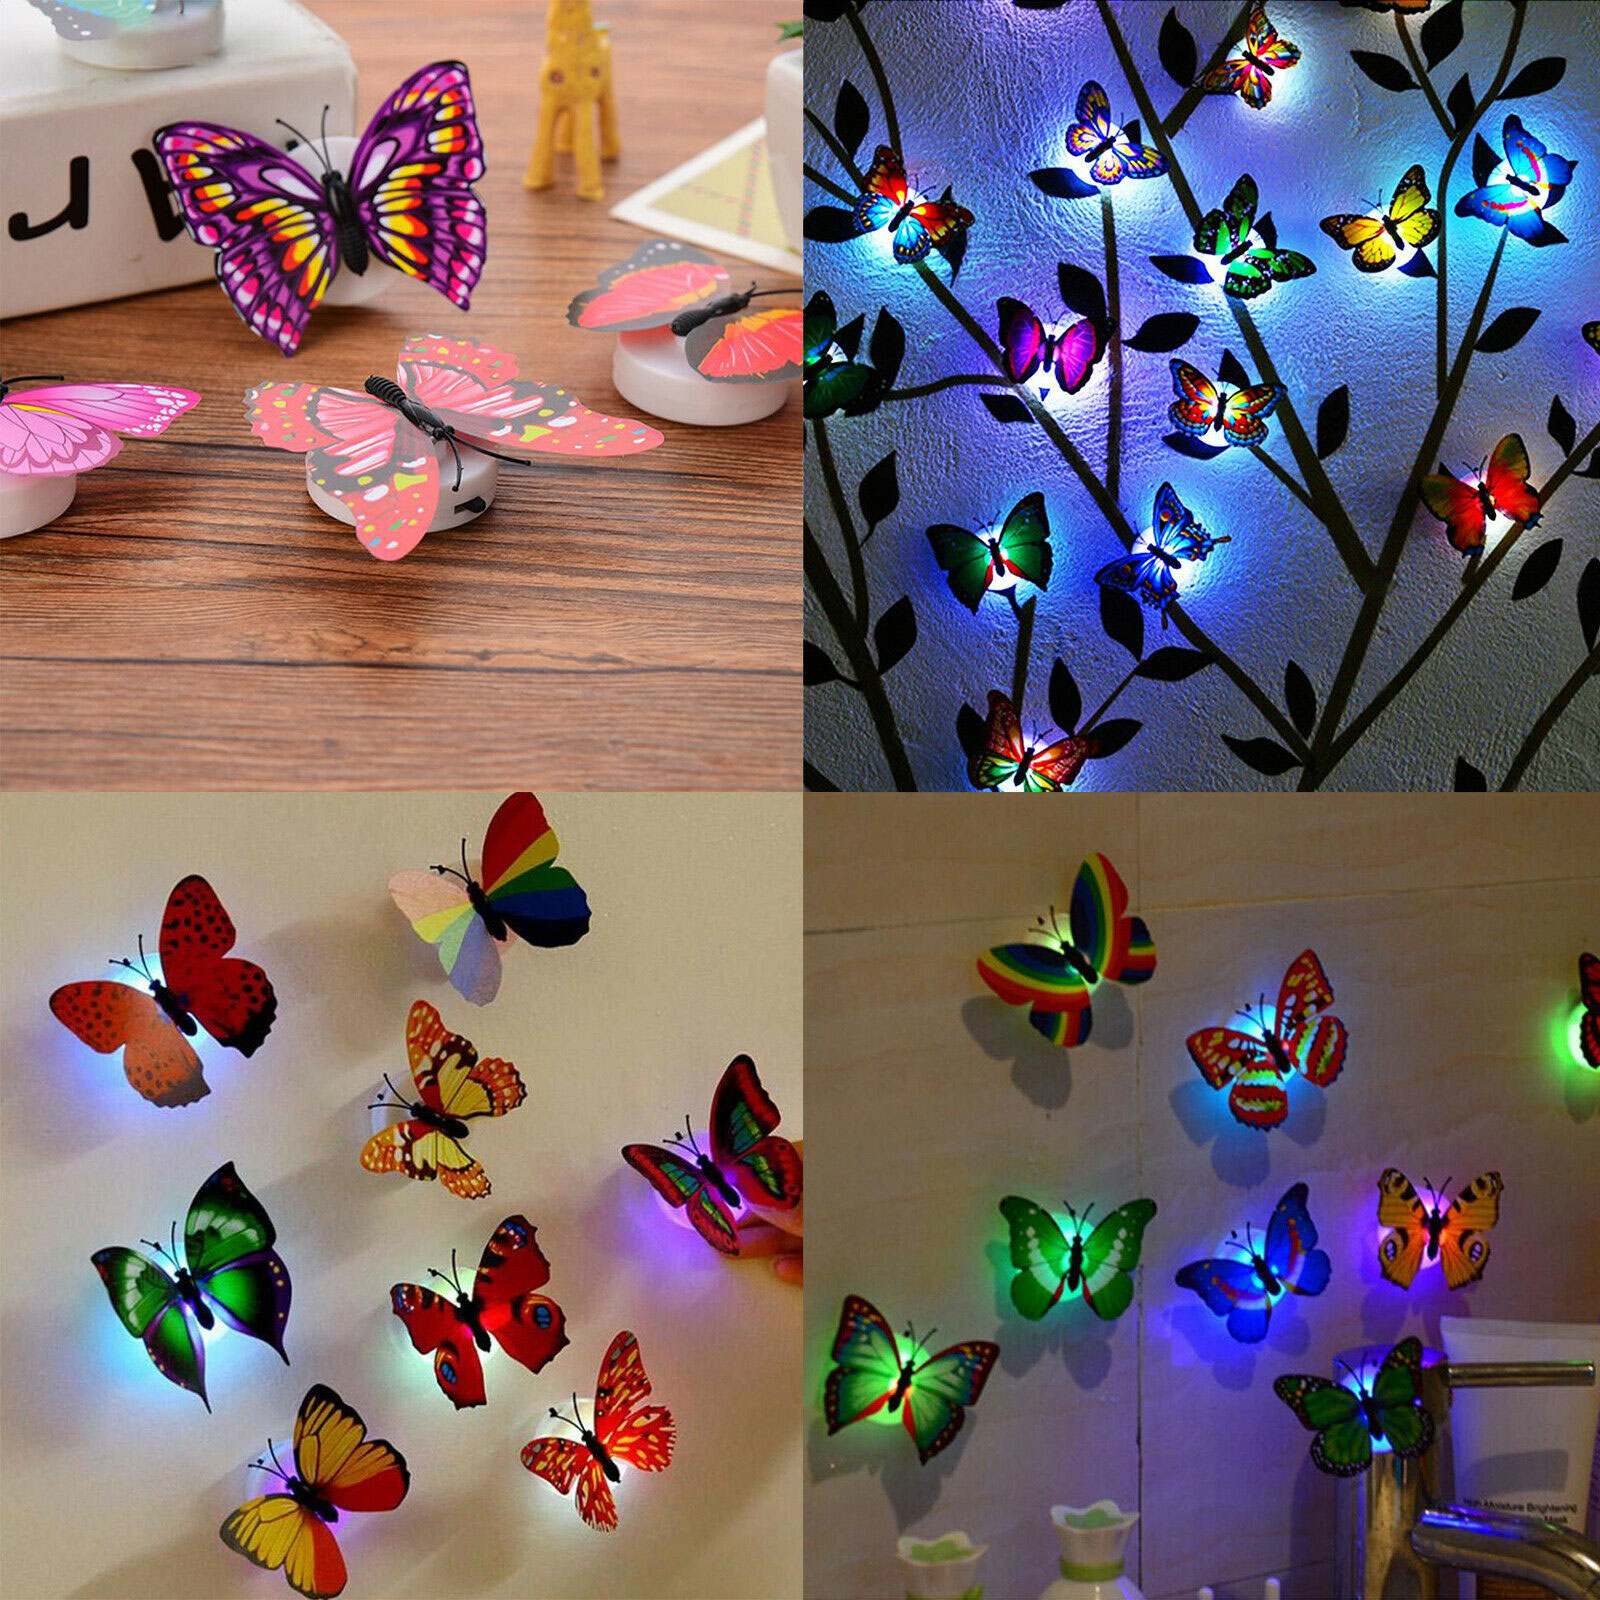 3D Glowing Butterfly Night LED Light Sticker Decals Home Bedroom Desk Wall Decor 